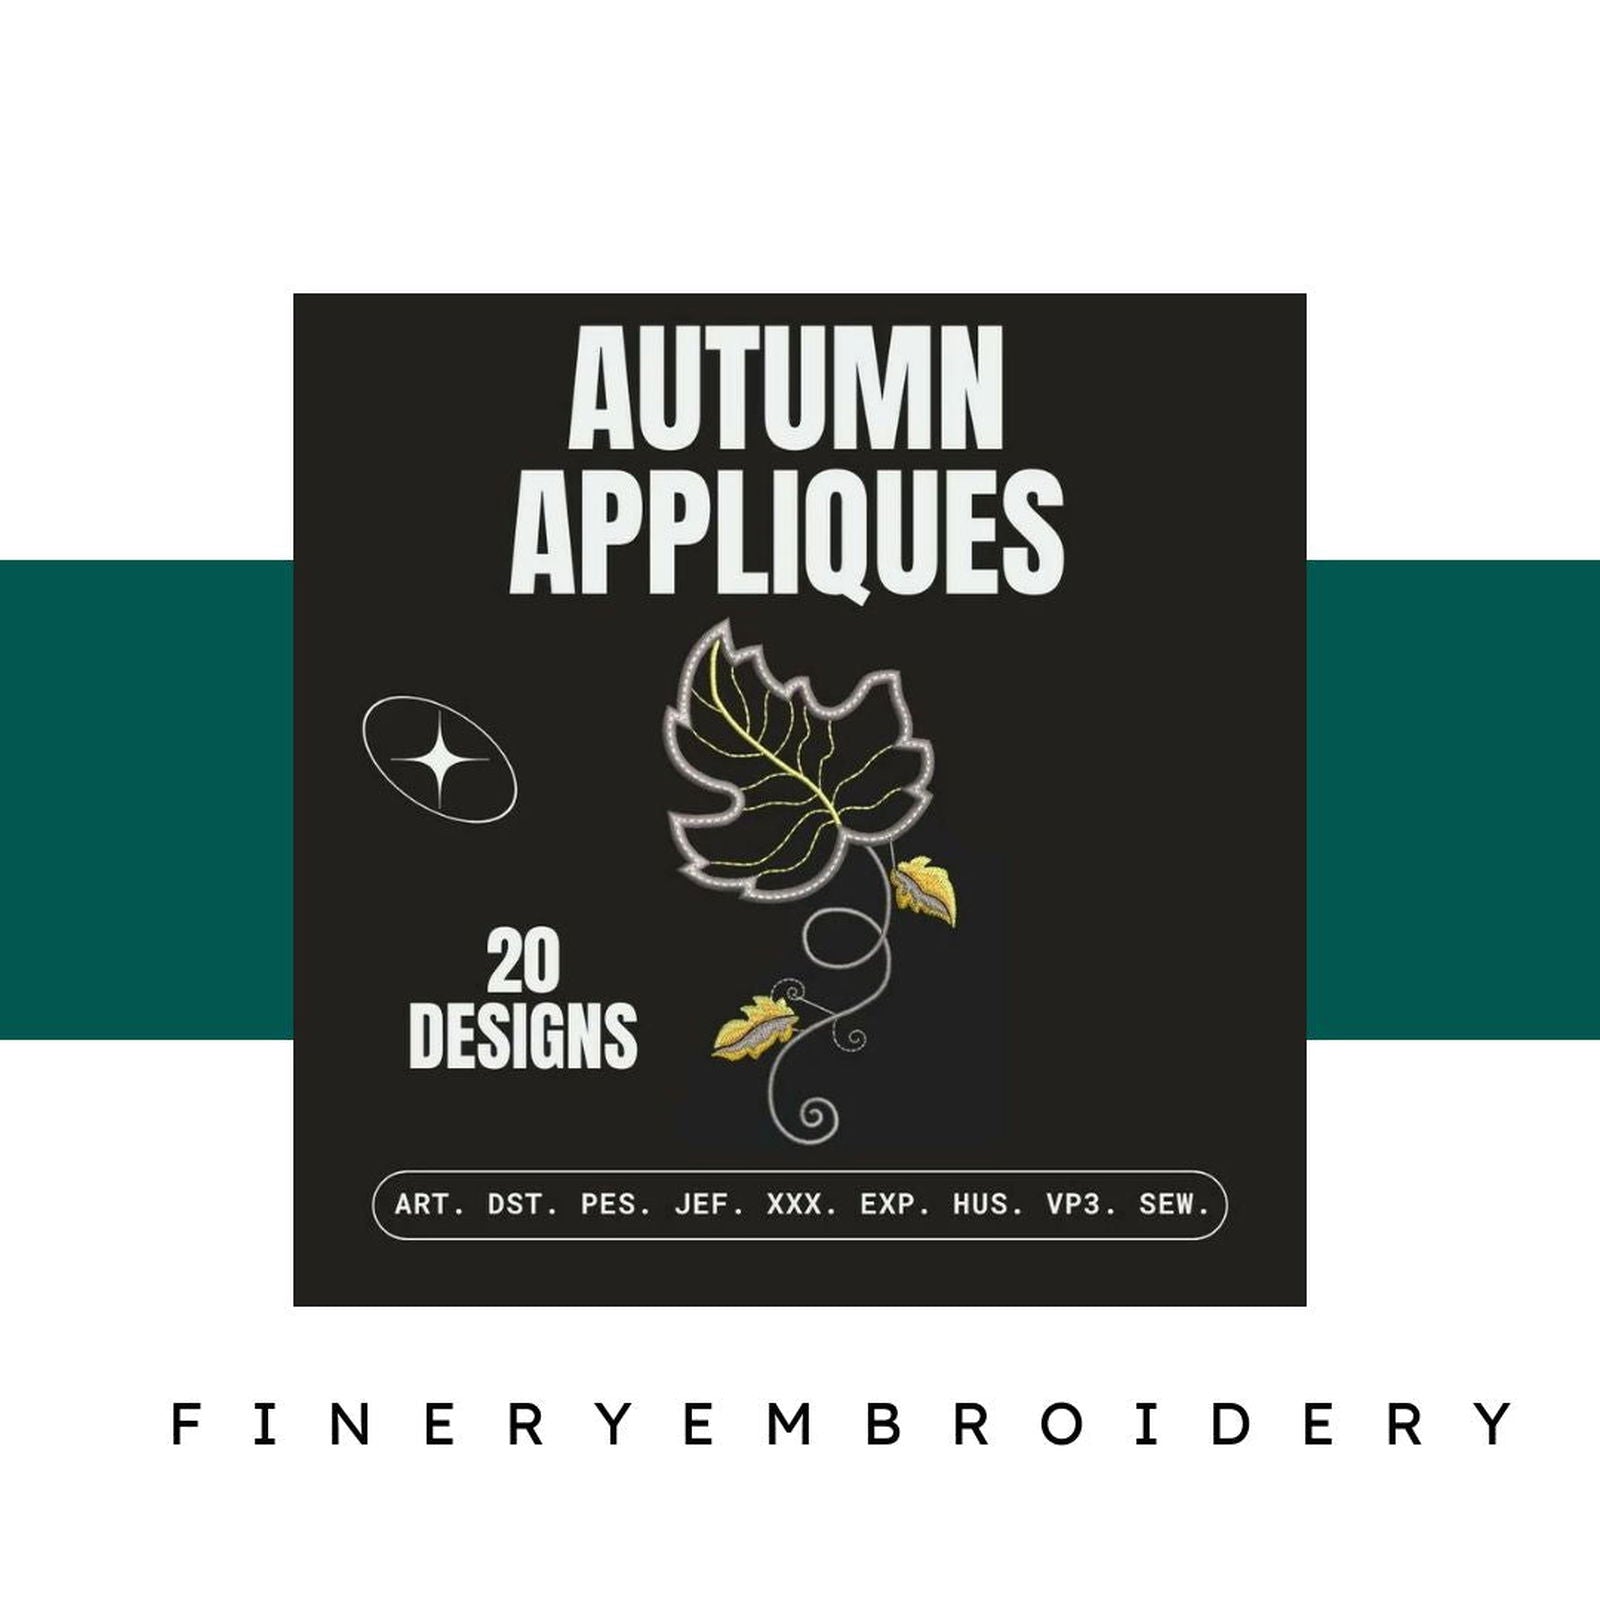 Autumn Appliques: Embroidery Design Pack - FineryEmbroidery